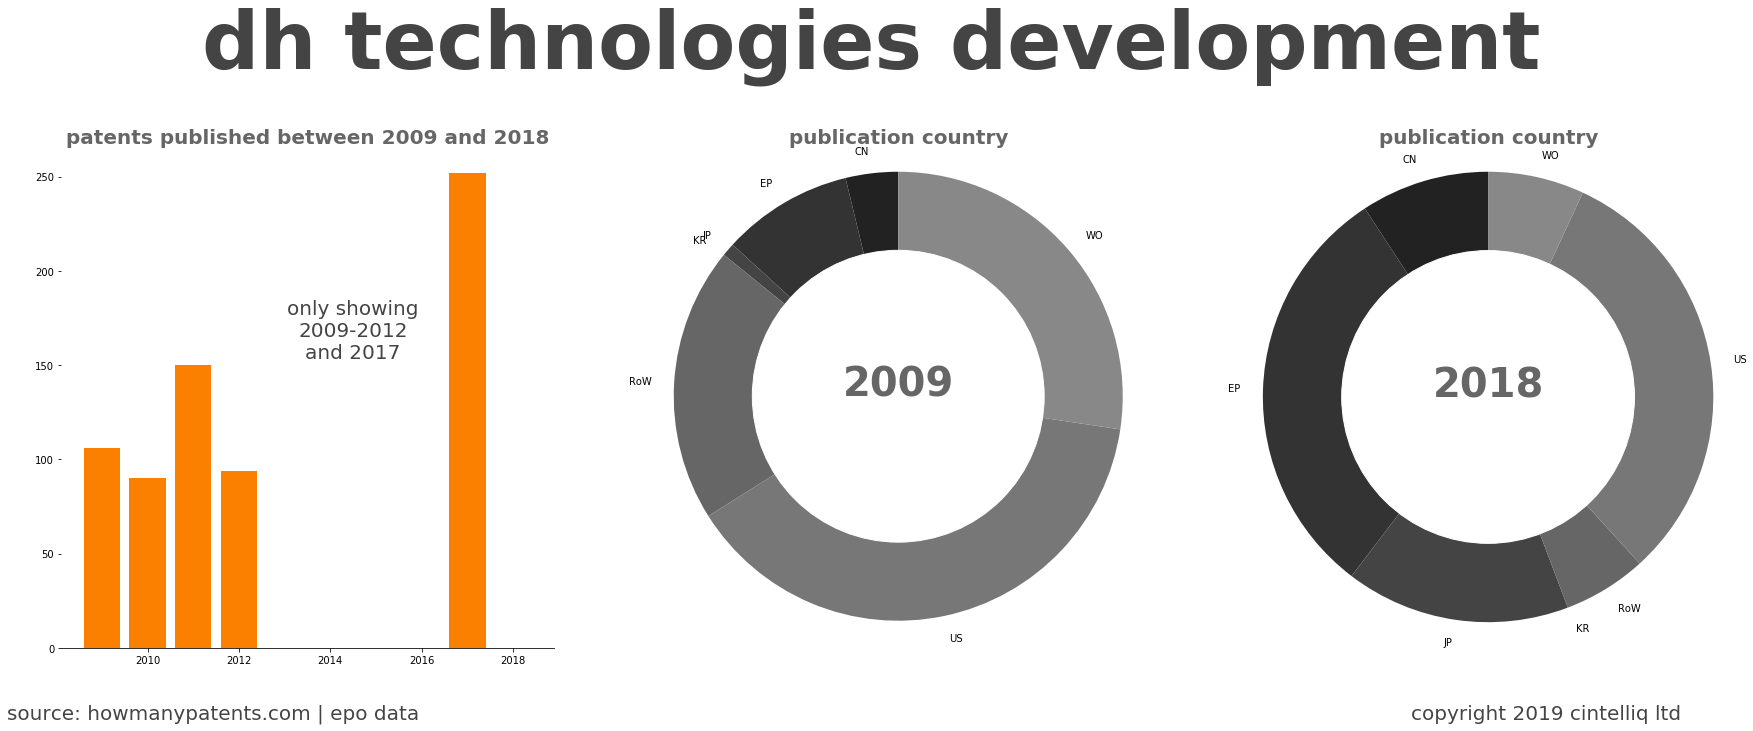 summary of patents for Dh Technologies Development